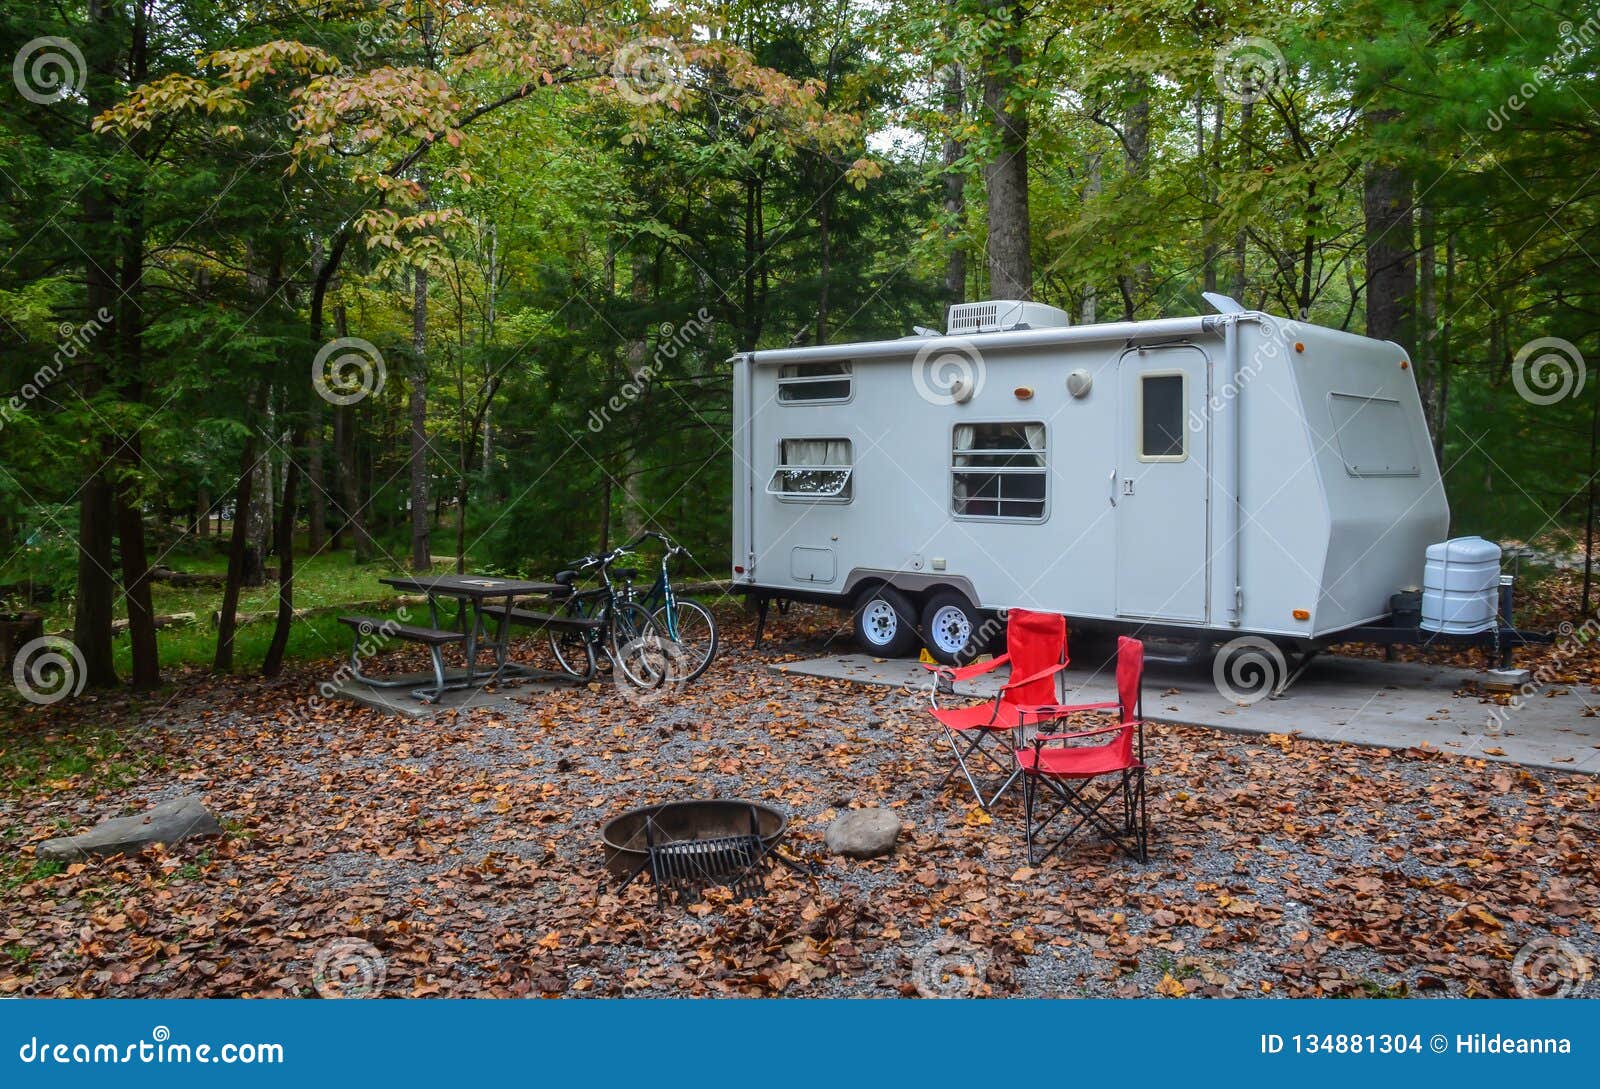 Camp Trailer Set Up In Campground Site With Bicycles Stock Photo